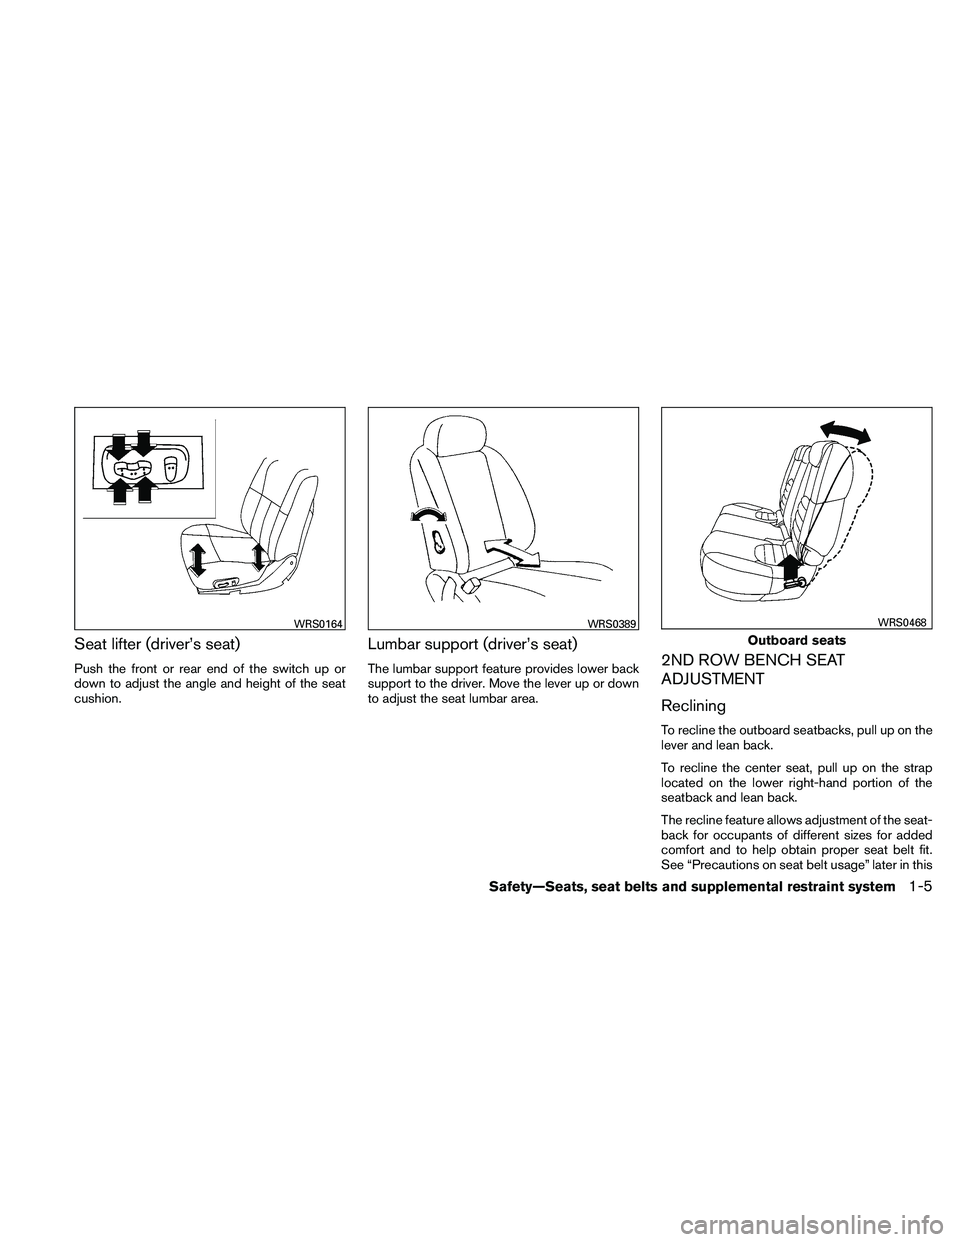 NISSAN PATHFINDER 2011  Owner´s Manual Seat lifter (driver’s seat)
Push the front or rear end of the switch up or
down to adjust the angle and height of the seat
cushion.
Lumbar support (driver’s seat)
The lumbar support feature provid